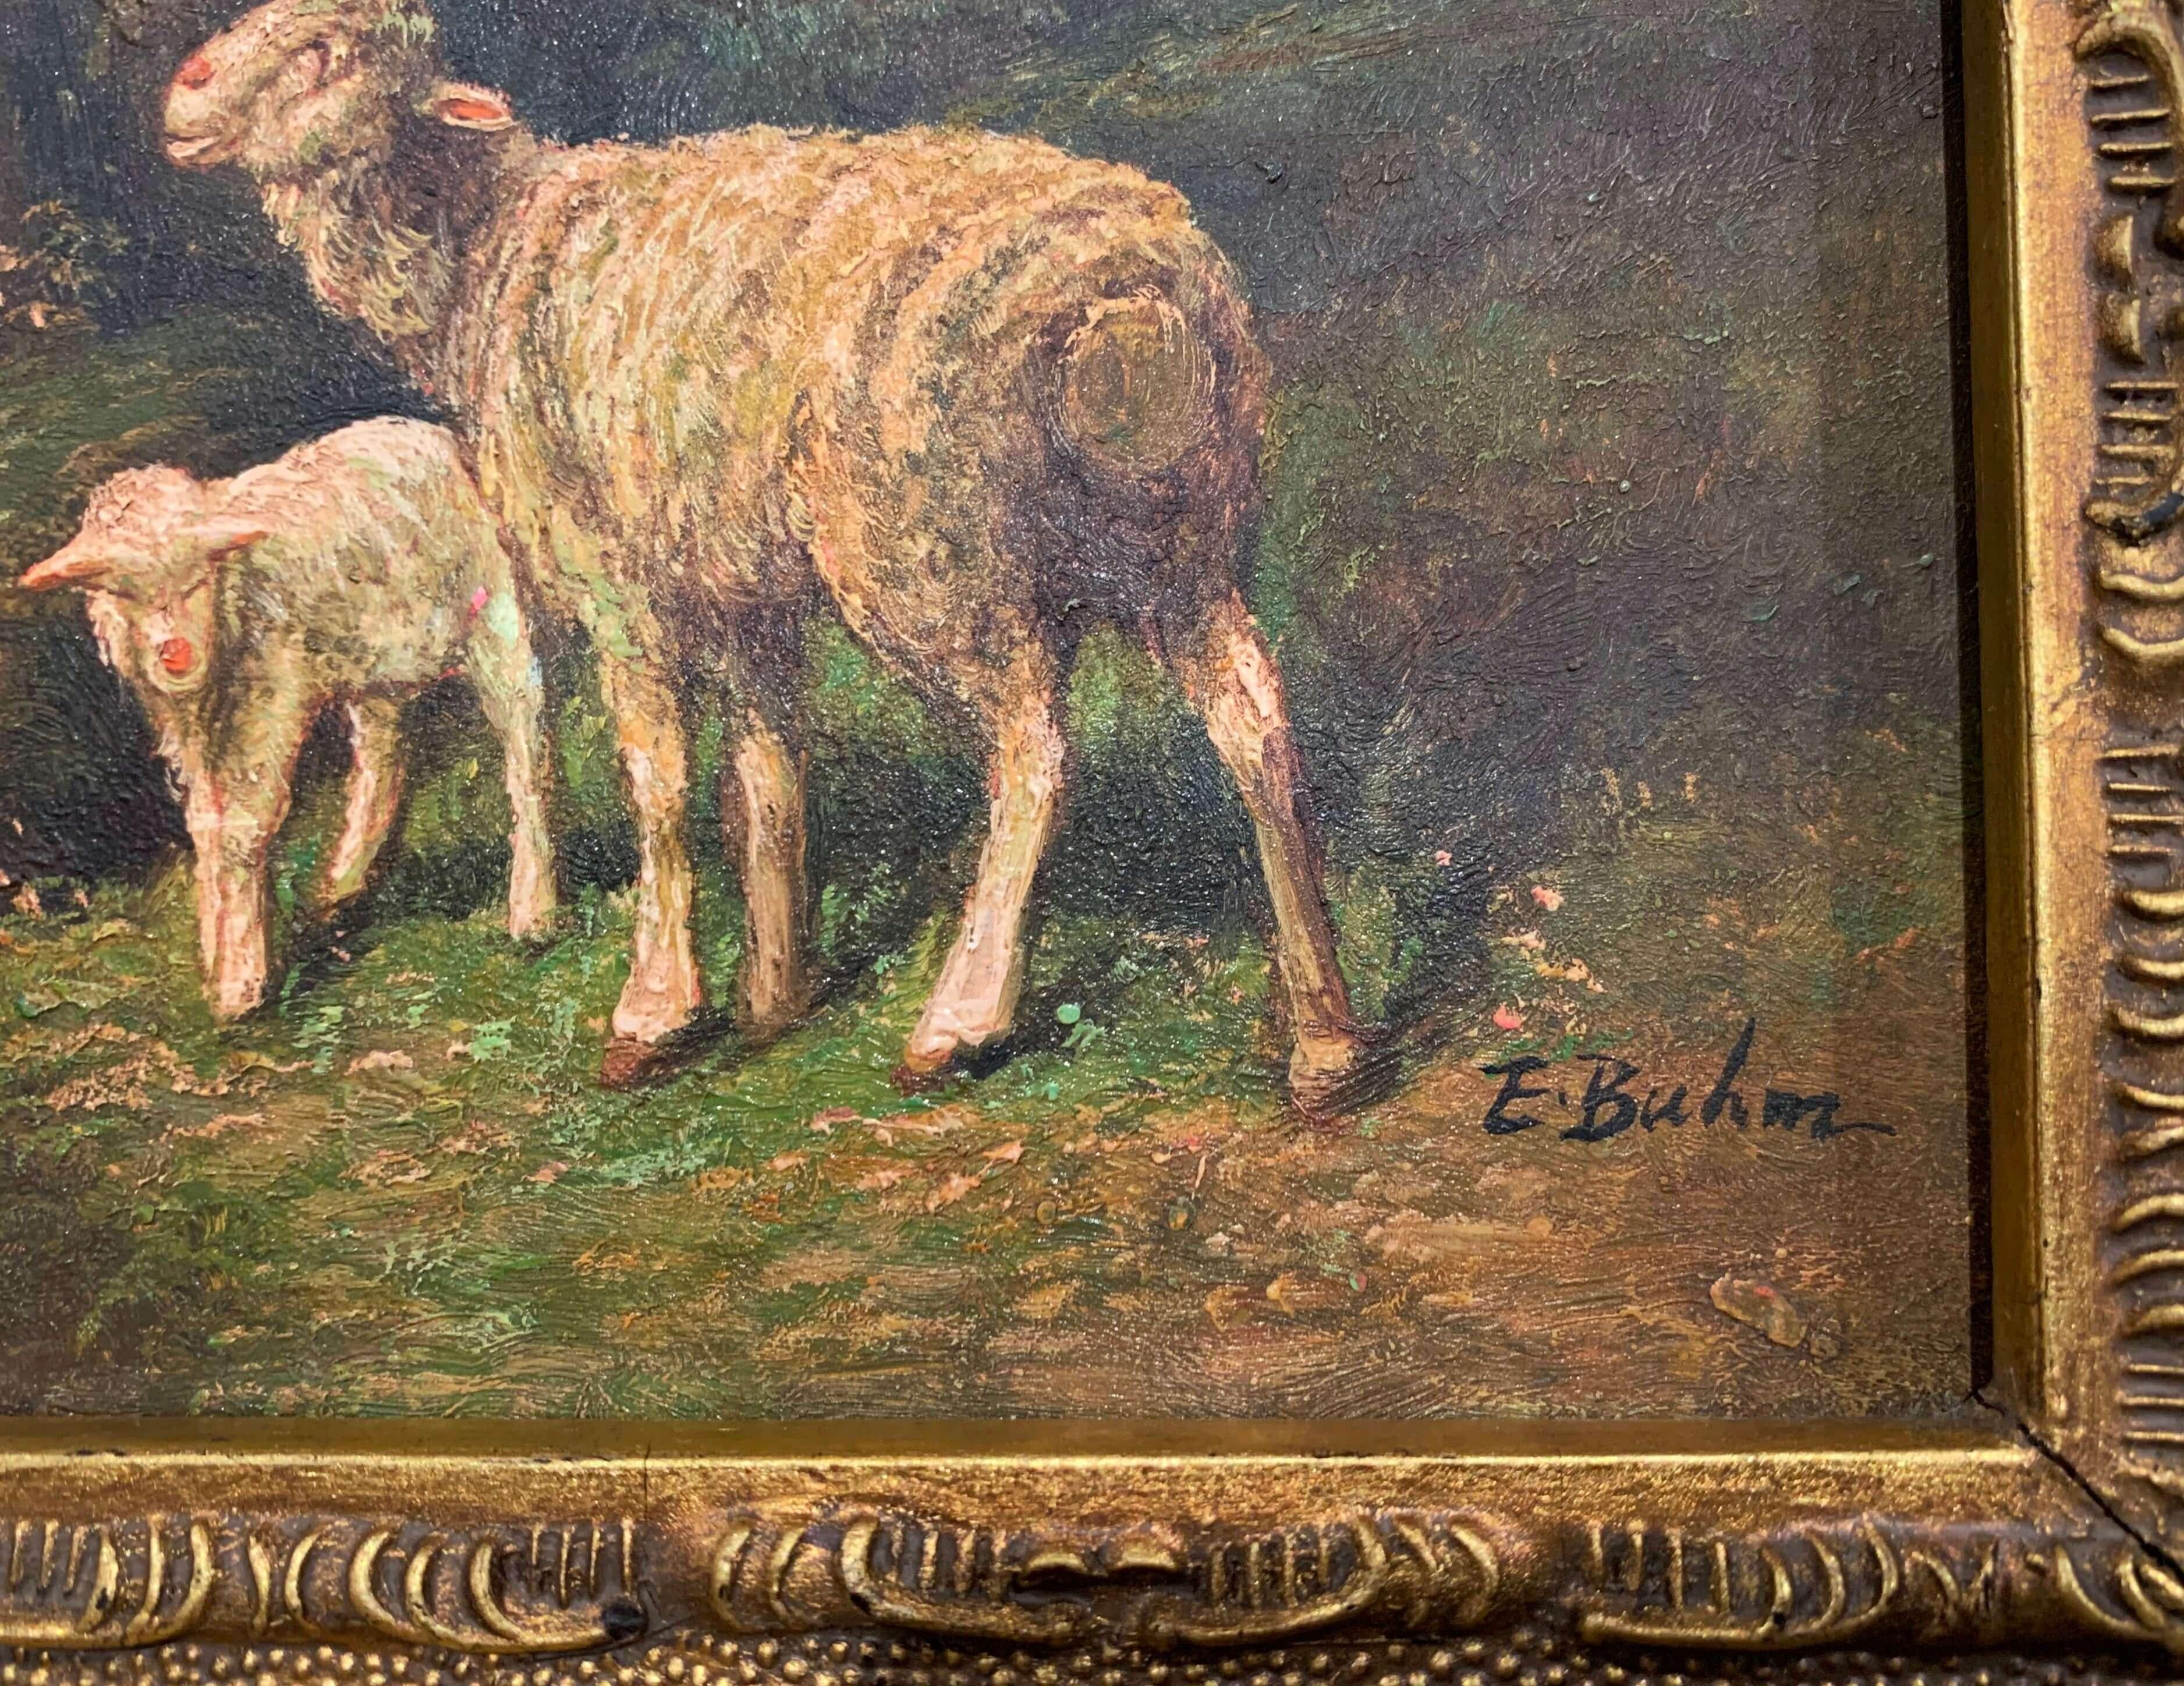 Hand-Painted 19th Century English Sheep Painting on Board in Gilt Frame Signed E. Buhm